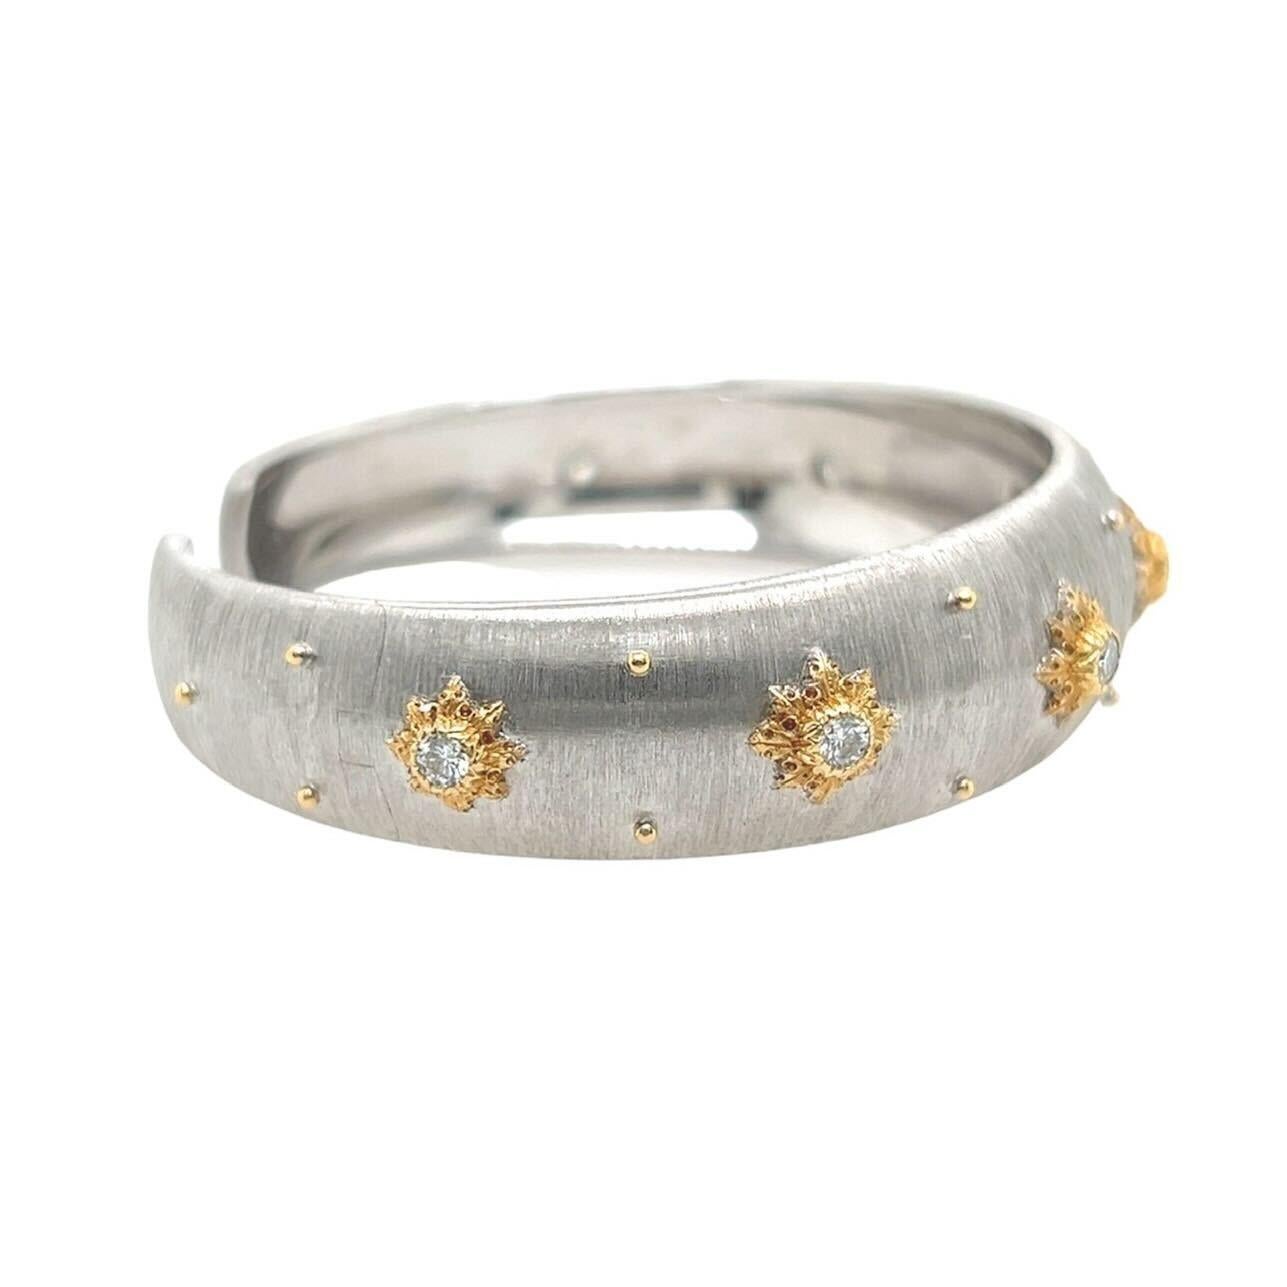 An 18 karat white and yellow gold and diamond bracelet, Buccellati.  The “Macri” bracelet designed as a hinged brushed white gold cuff applied with seven rosettes of yellow gold, each set with a brilliant cut diamond, further decorated with eighteen